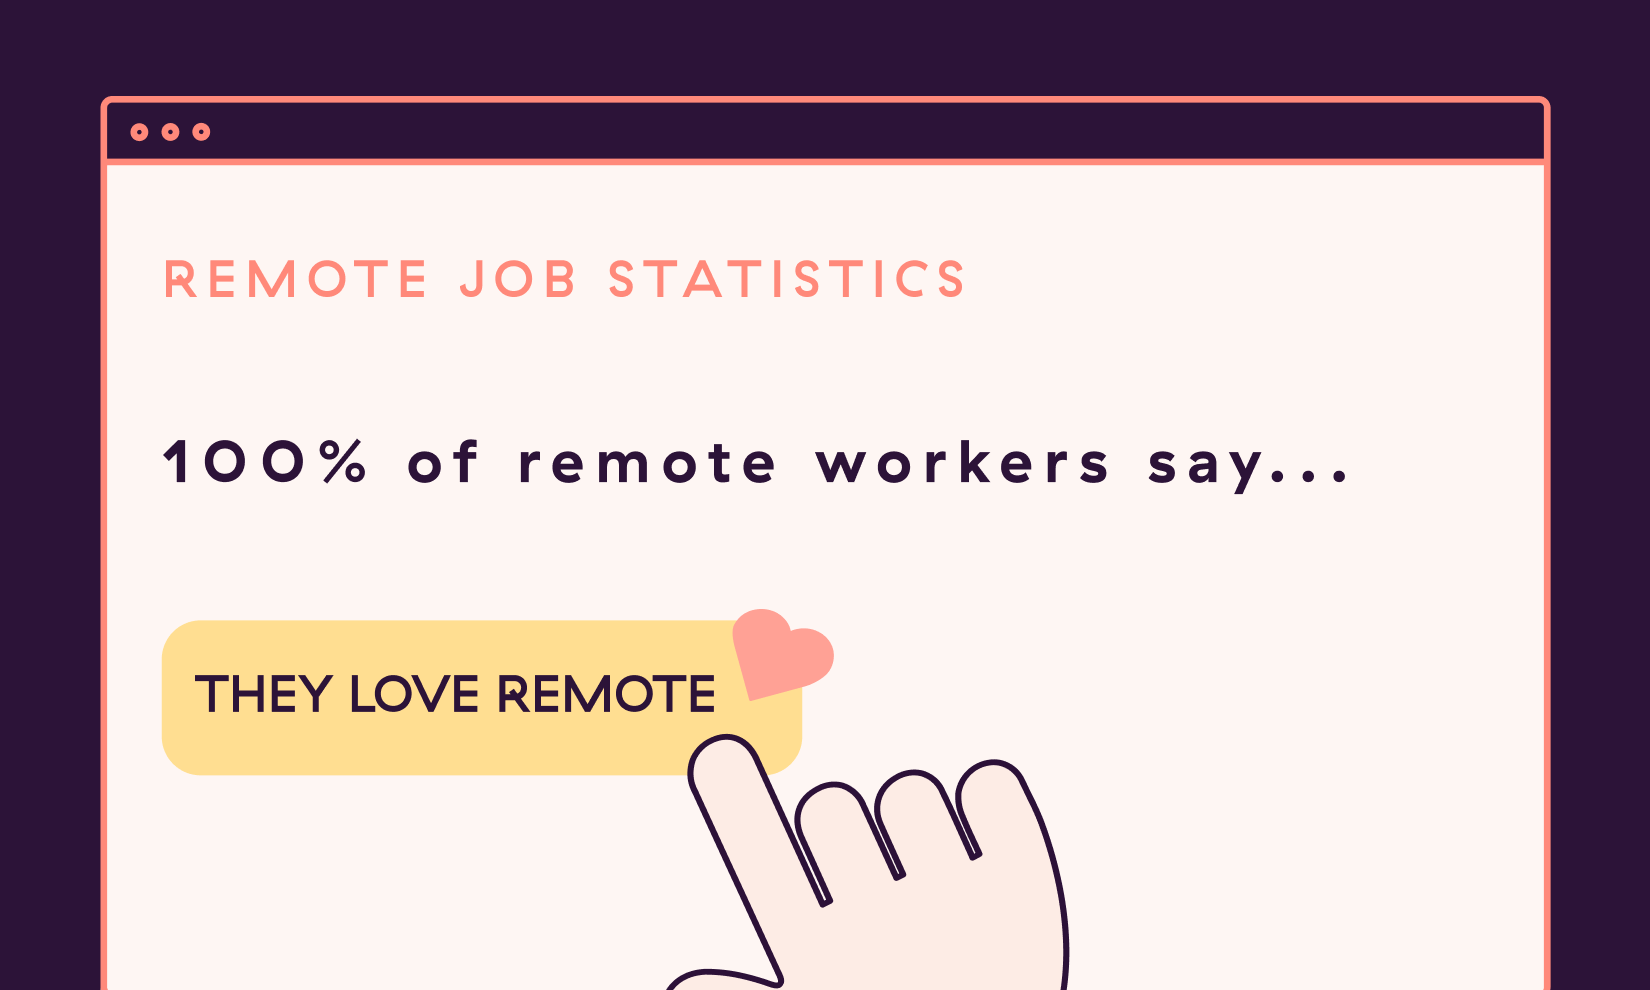 Remote workers say